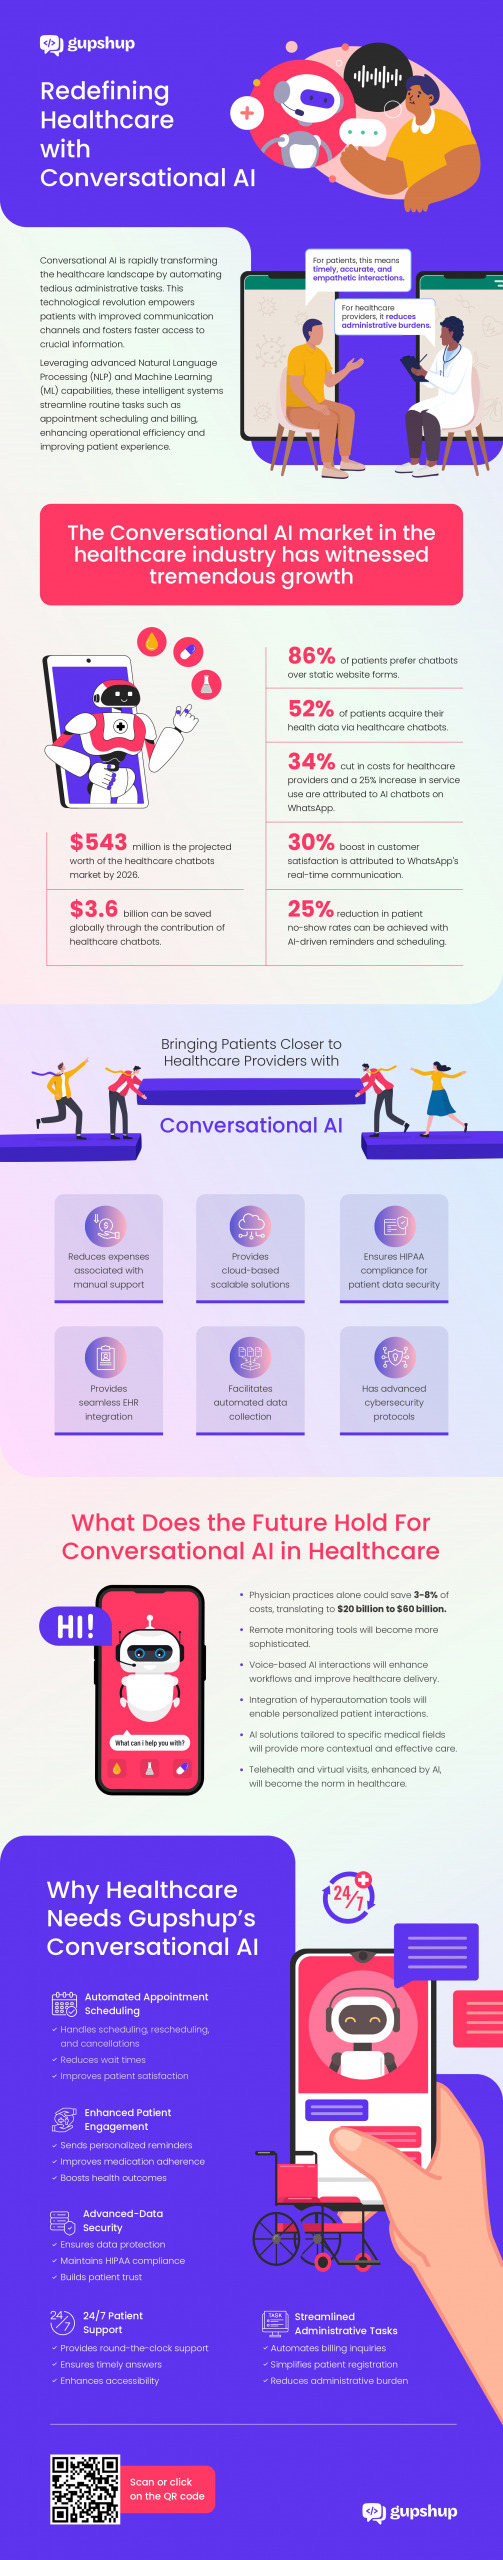 Infographic showcasing the impact of Conversational AI in healthcare, including reduced patient no-show rates, automated administrative tasks, financial benefits for providers, market growth projections, advanced data security, and enhanced patient engagement.